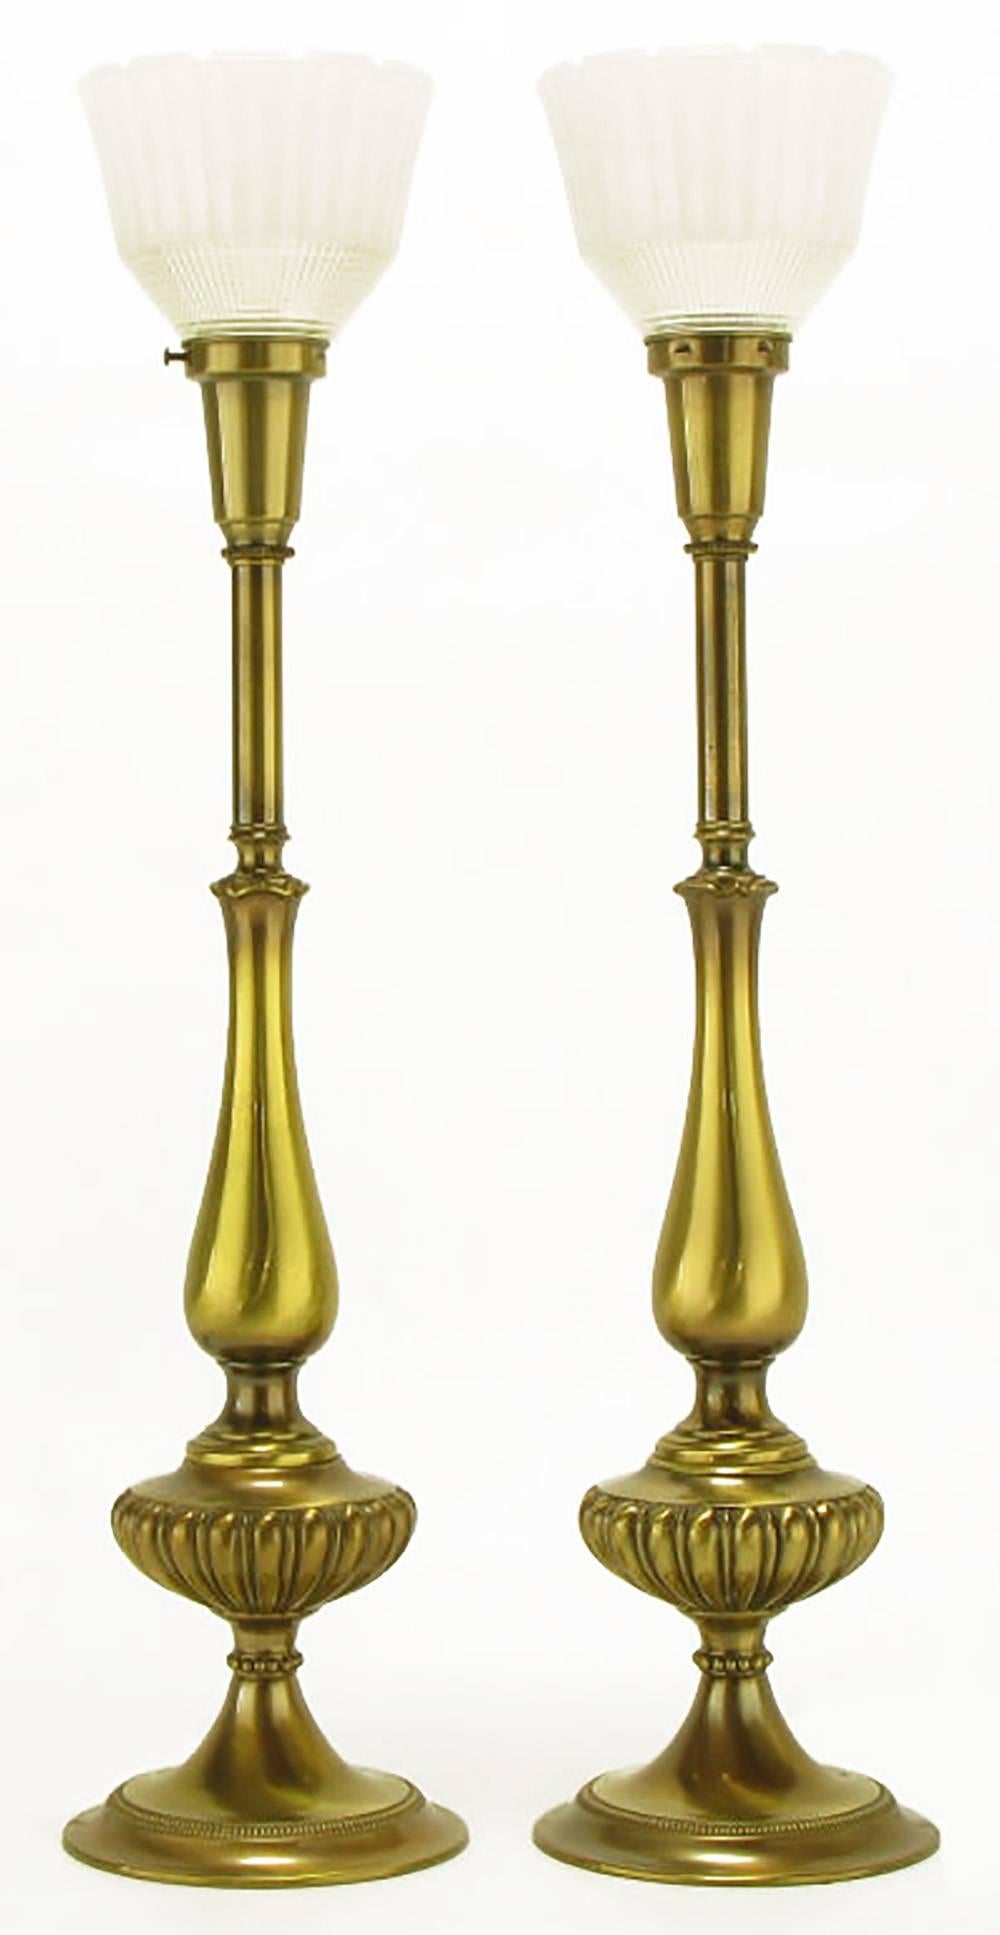 Elegant pair of solid brass Regency style table lamps from Rembrandt Lamp Company. Flanged base with egg and dart body that resembles the oil basins of pre-electric lamps. Antique lacquer finish with original glass diffuser. Sold sans shades.